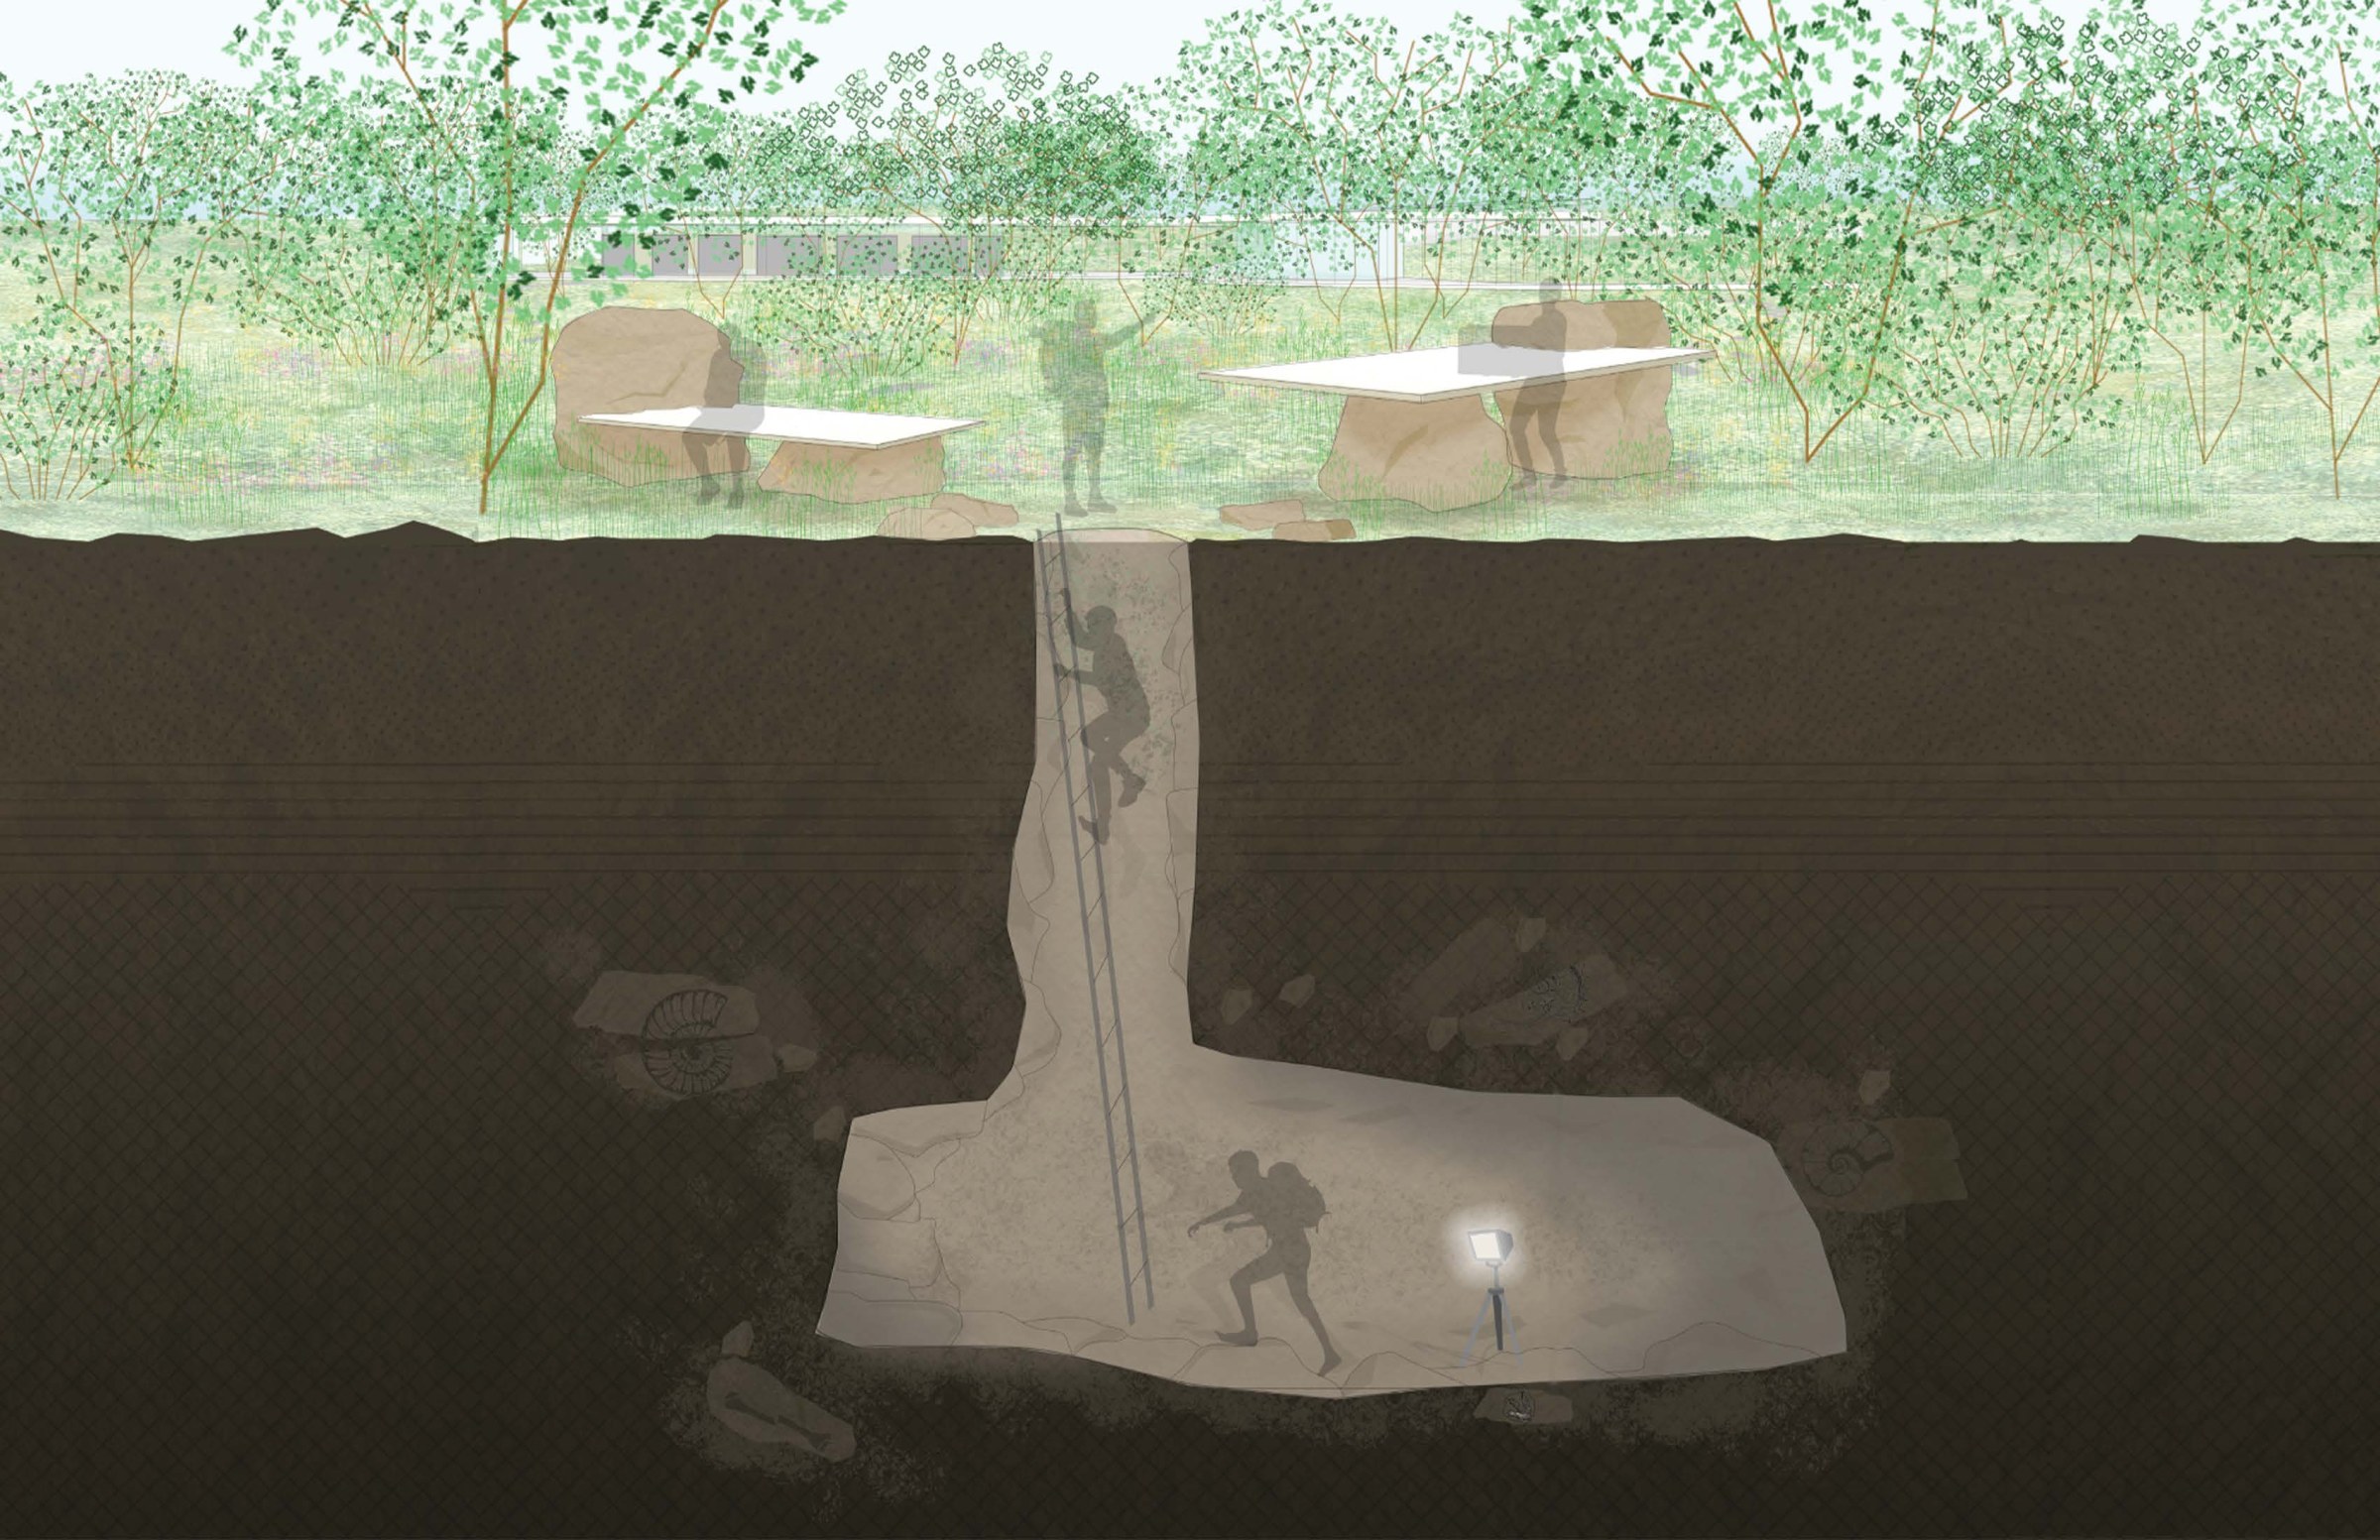 Malina Pickard's thesis project underground to above ground render